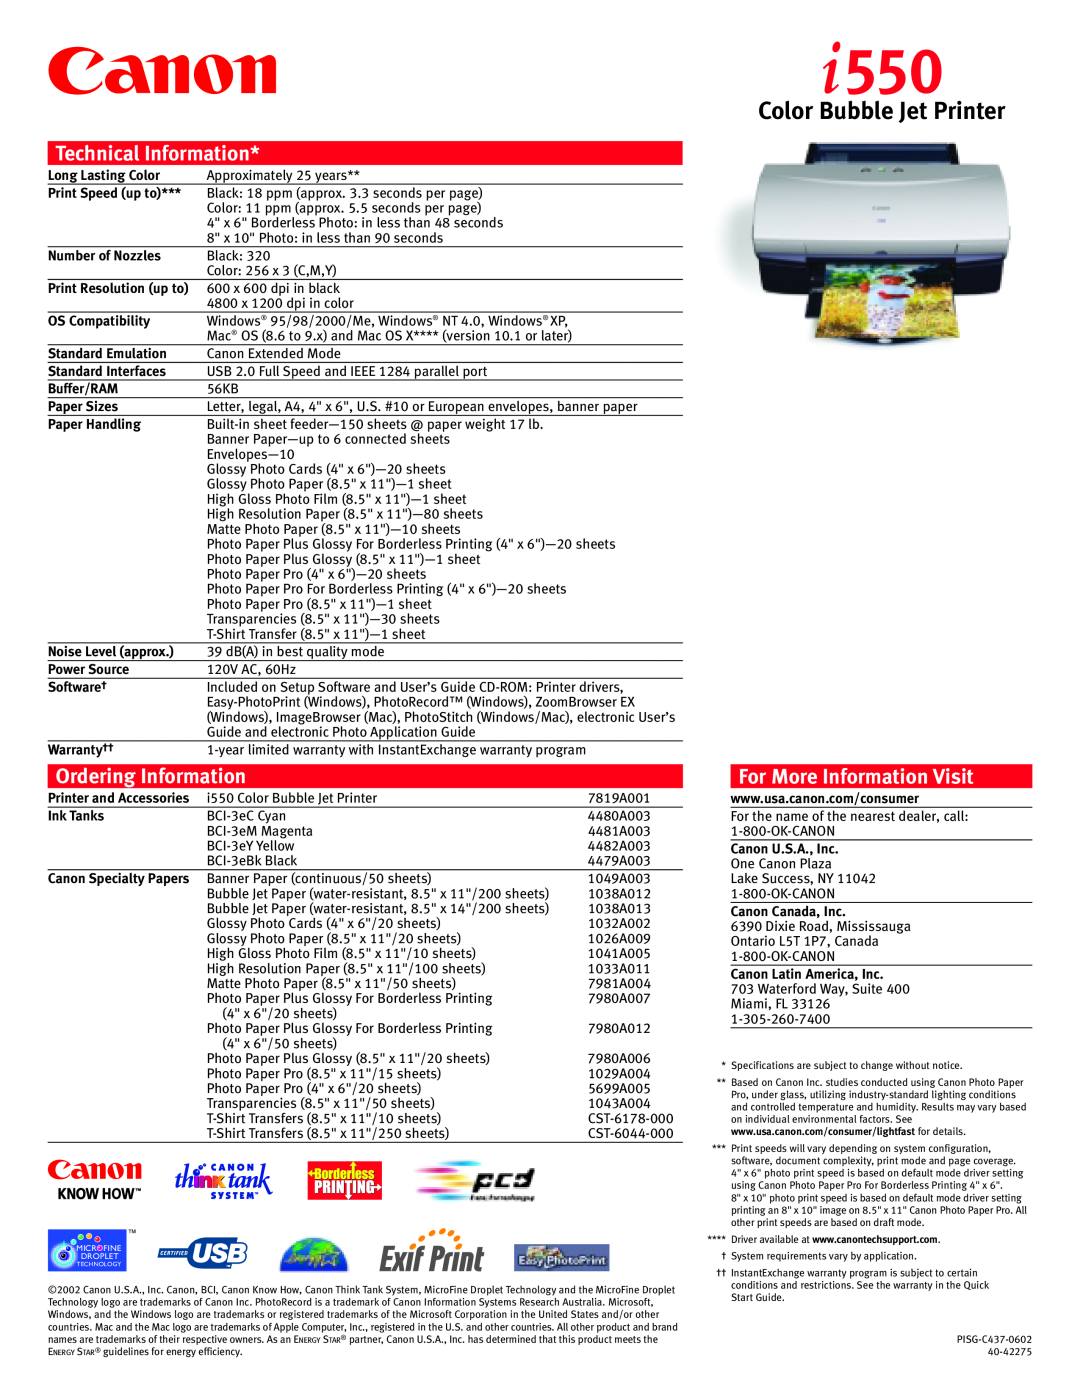 Canon manual i550, Color Bubble Jet Printer, Technical Information, Ordering Information, For More Information Visit 